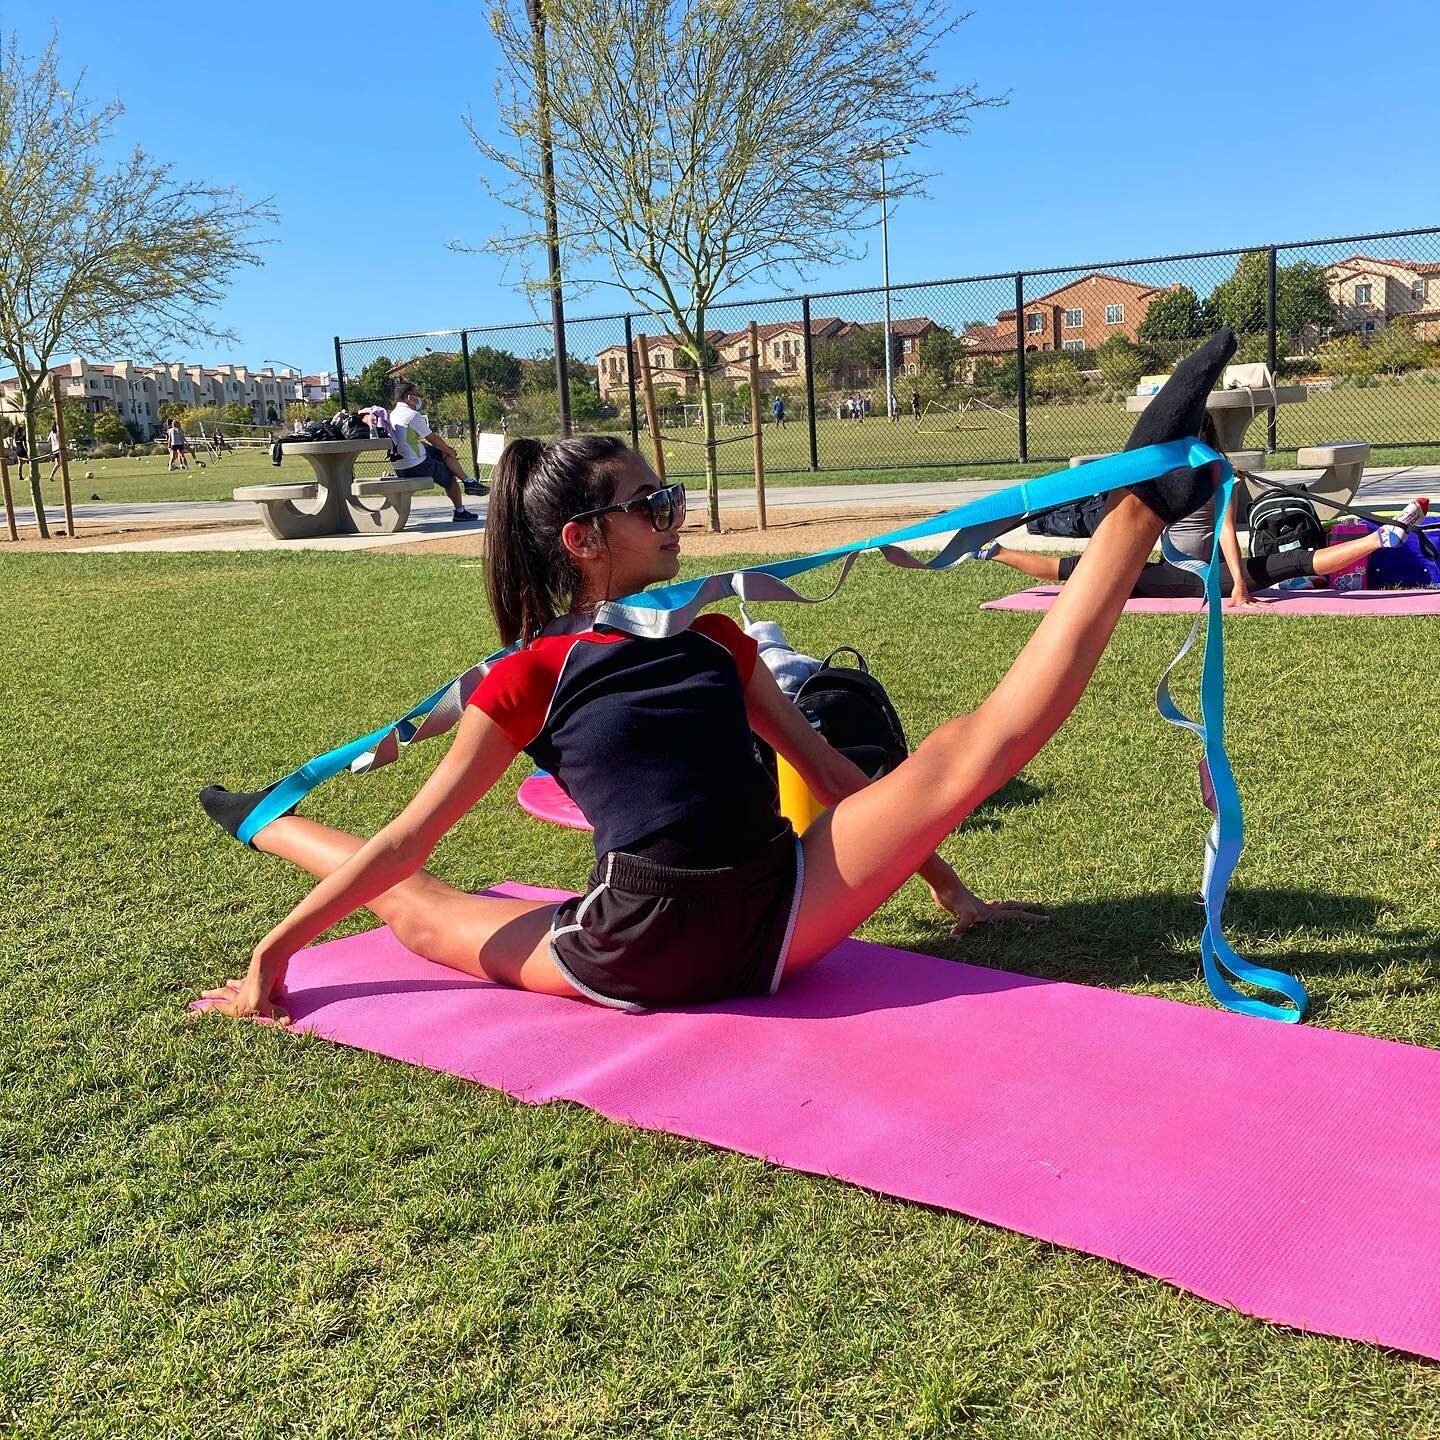 This is how we work on our tans. Come join us for outdoor #rhythmicgymnasticssandiego #rhythmicgymnastics #rhythmic #sandiego #sandiegorhythmic #sandiegorhythms #gymnastics #sandiegogymnastics #flexibility #cardio #художественнаягимнастика #сандиего 